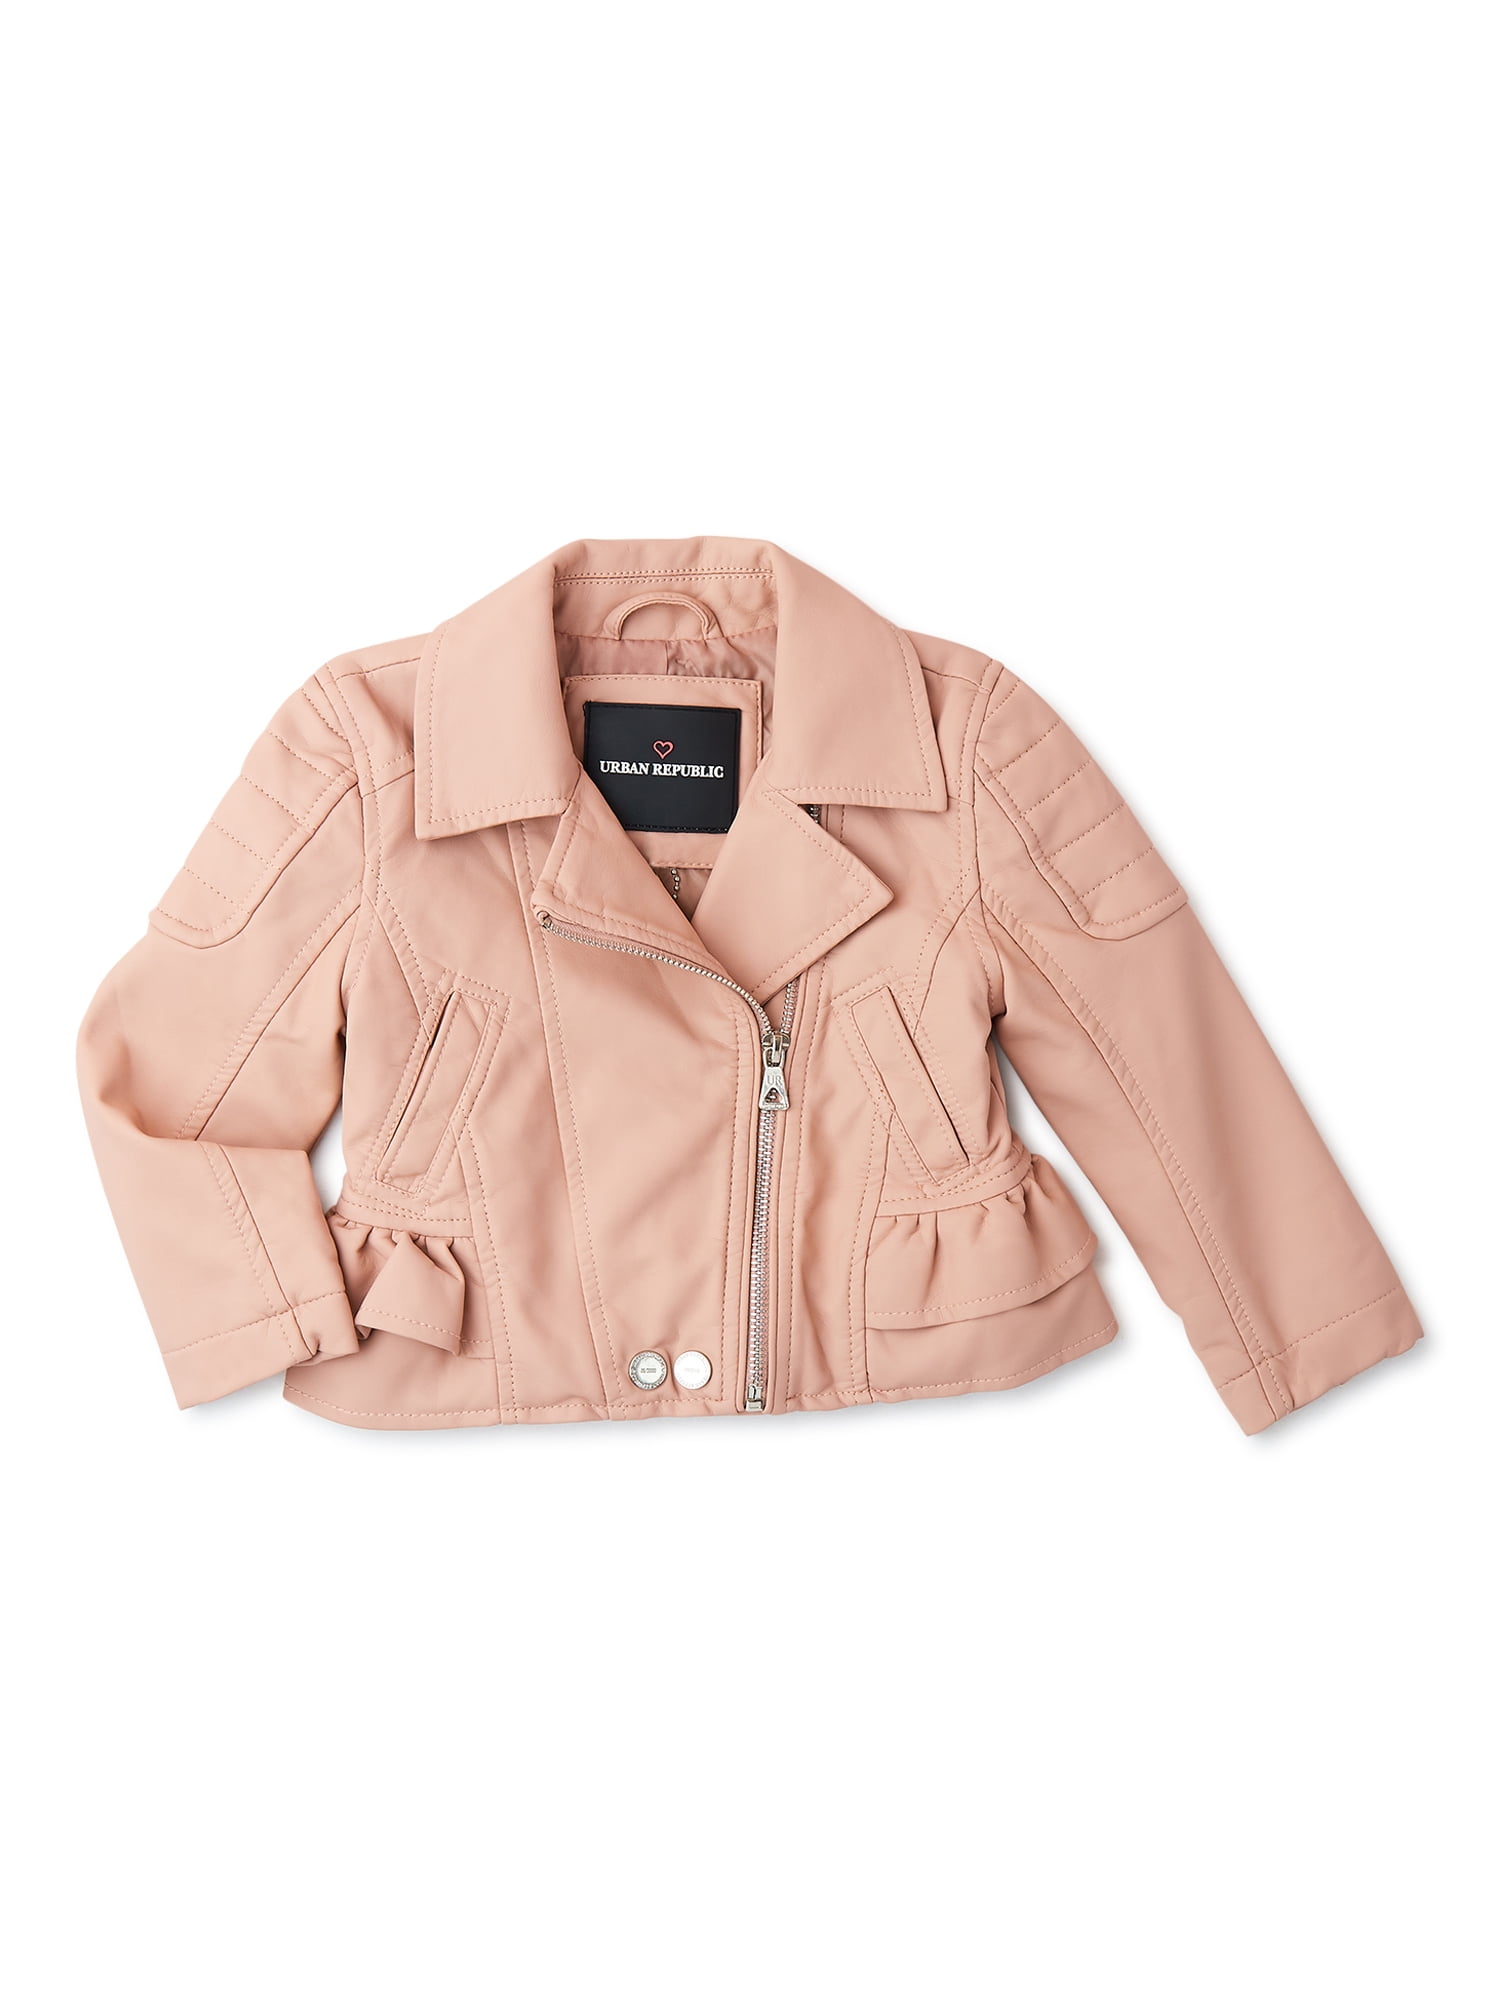 Urban Republic Baby and Toddler Girls Faux Leather Moto Jacket, Sizes  12M-4T - Walmart.com